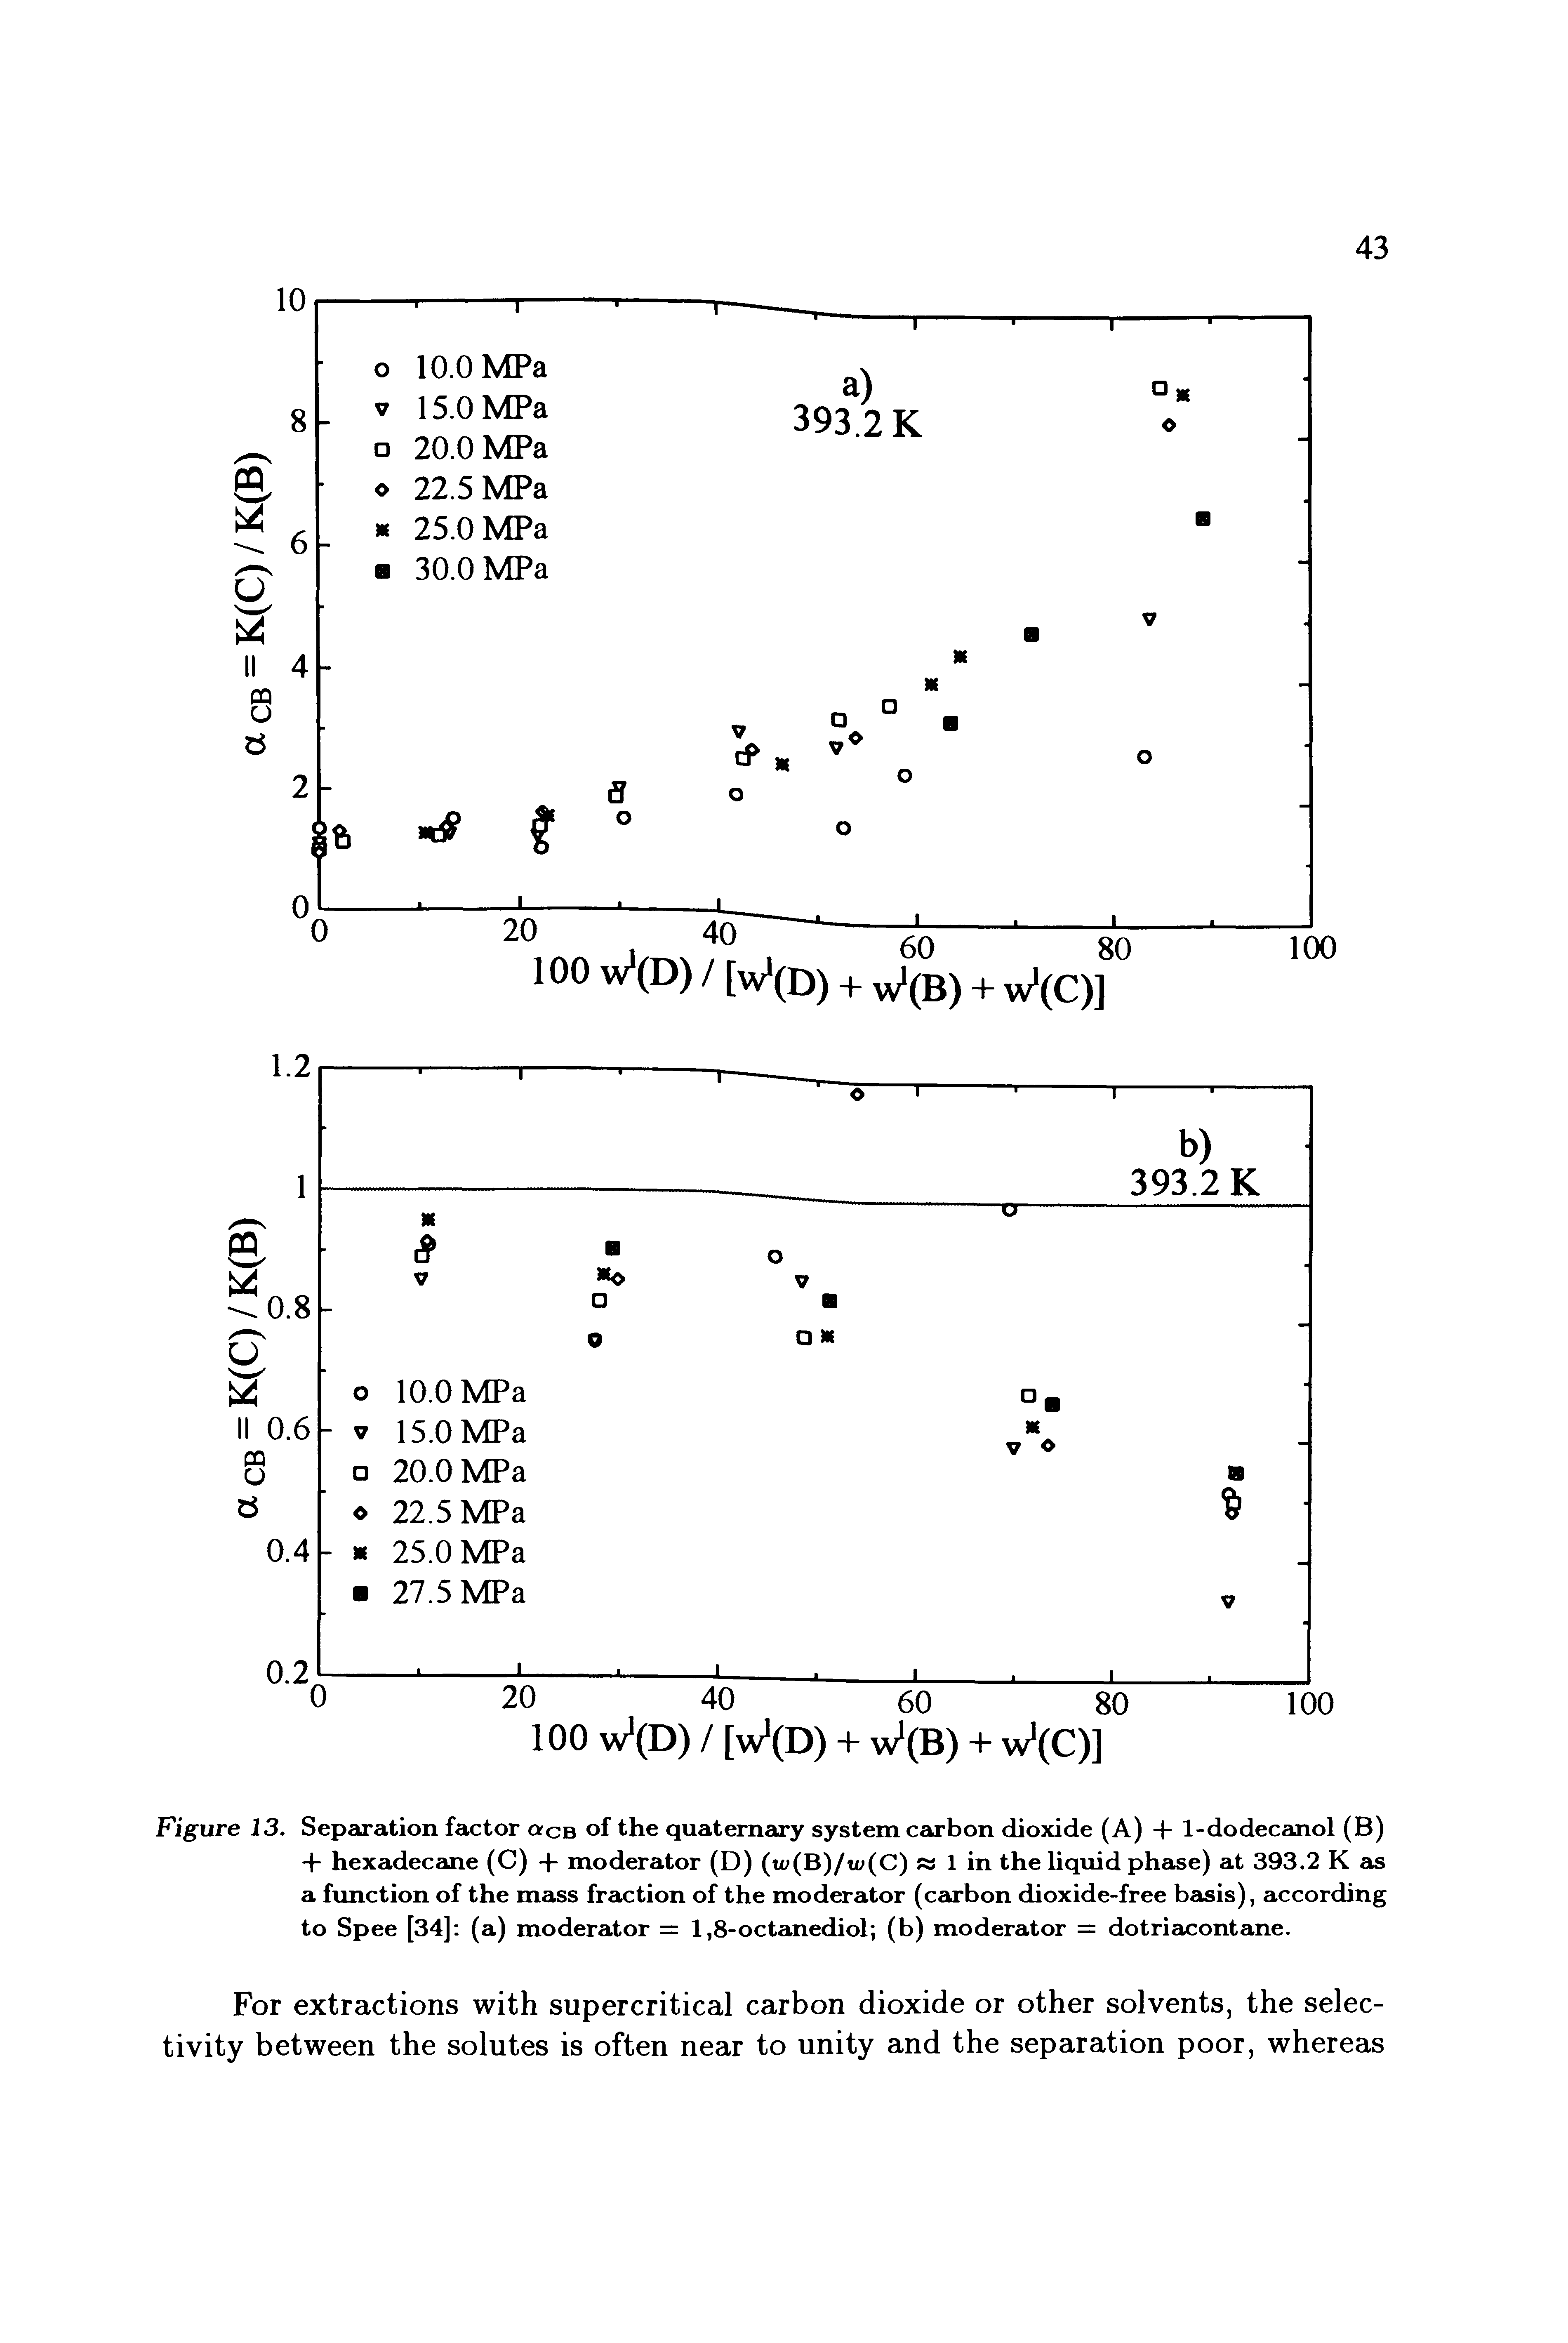 Figure 13. Separation factor ace of the quaternary system carbon dioxide (A) + 1-dodecanol (B) + hexadecane (C) + moderator (D) (u (B)/u (C) w 1 in the liquid phase) at 393.2 K as a fimction of the mass fraction of the moderator (carbon dioxide-free basis), according to Spee [34] (a) moderator = 1,8-octanediol (b) moderator = dotriacontane.